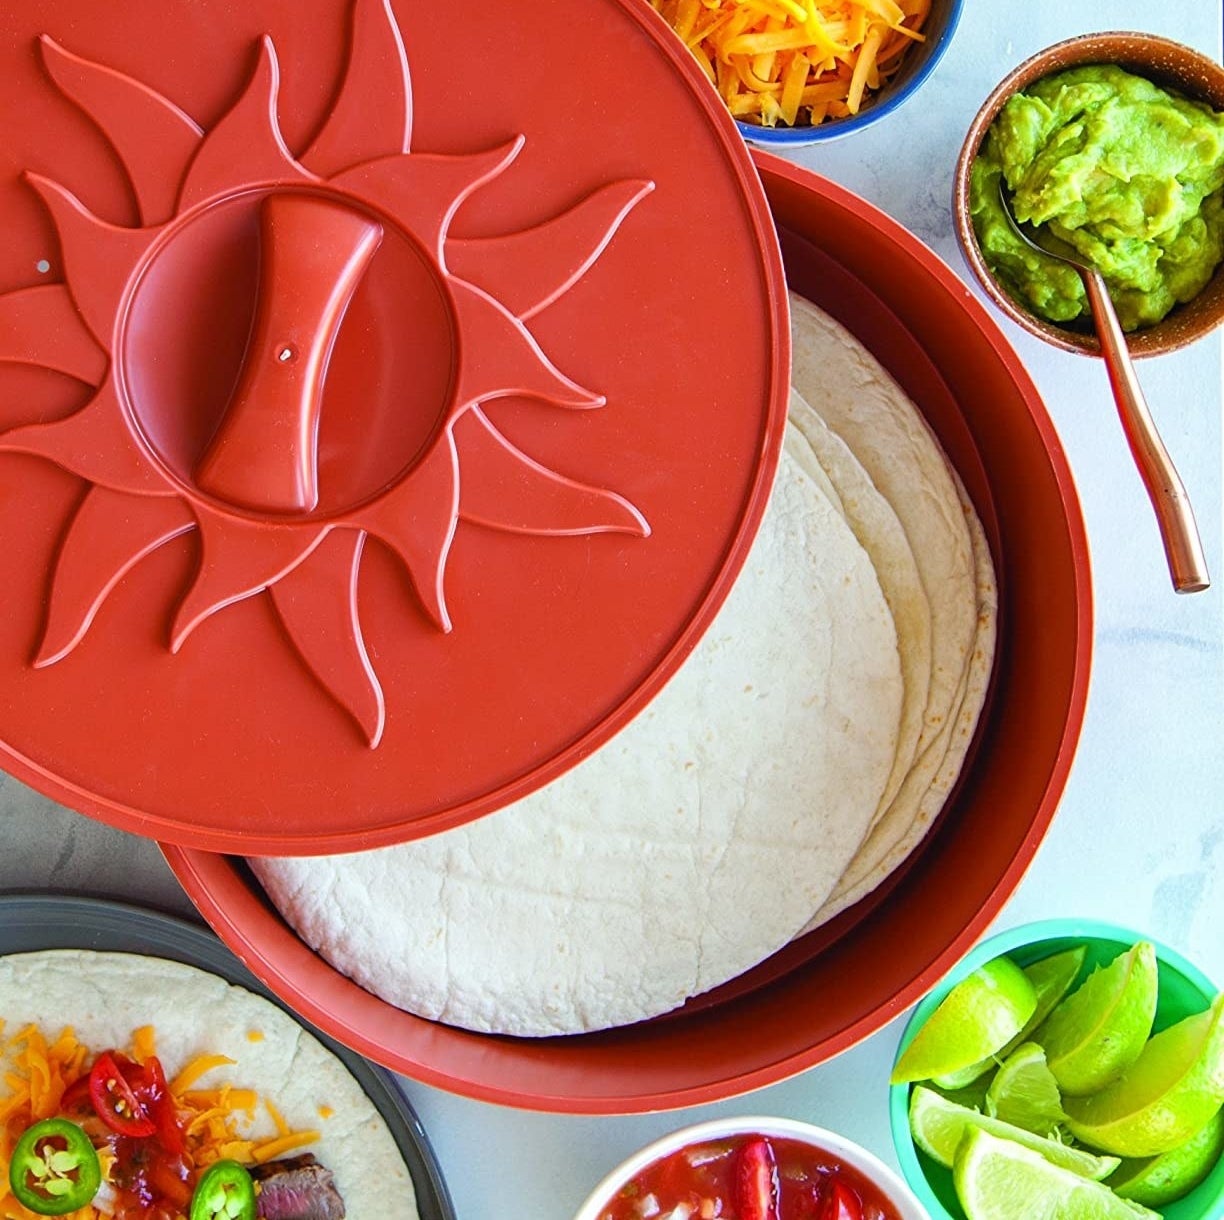 The tortilla warmer filled with flour tortillas and surrounded by condiments